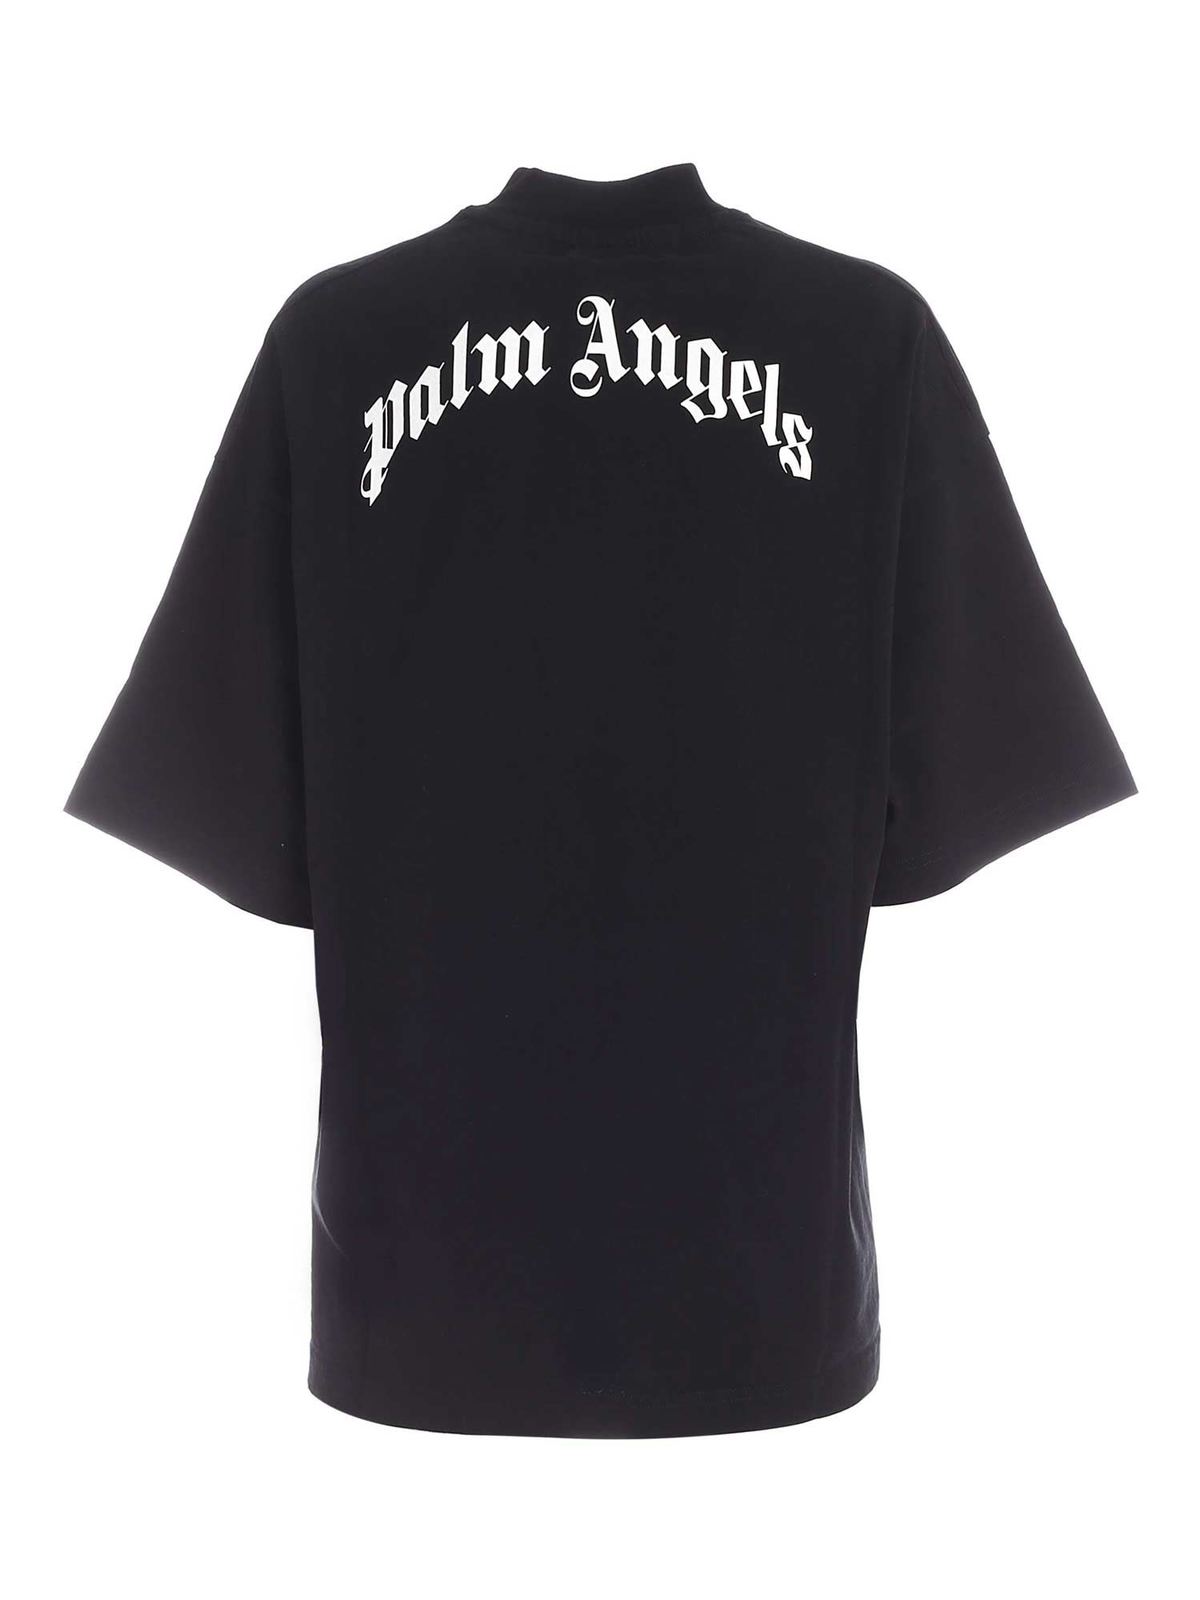 palm angels oversize tee